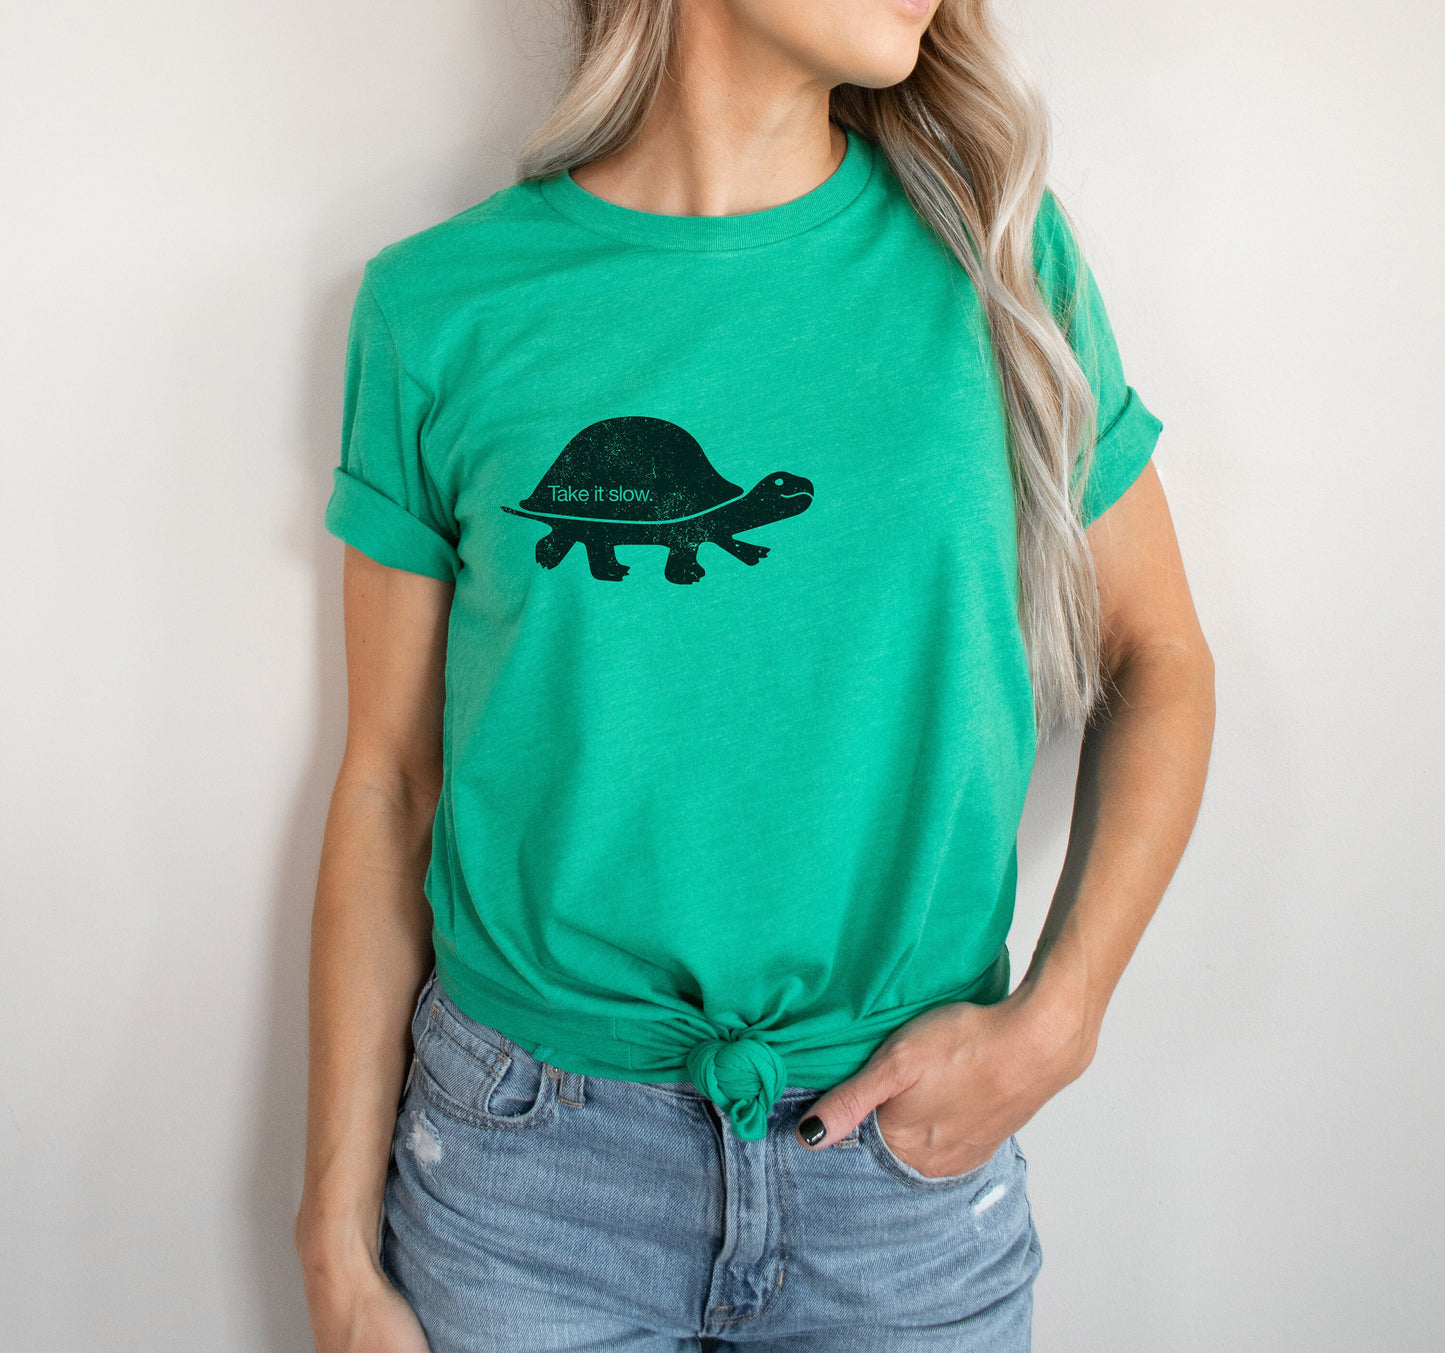 Take It Slow Perfect Turtle Lovers Ultra Soft Graphic Tee Unisex Soft Tee T-shirt for Women or Men